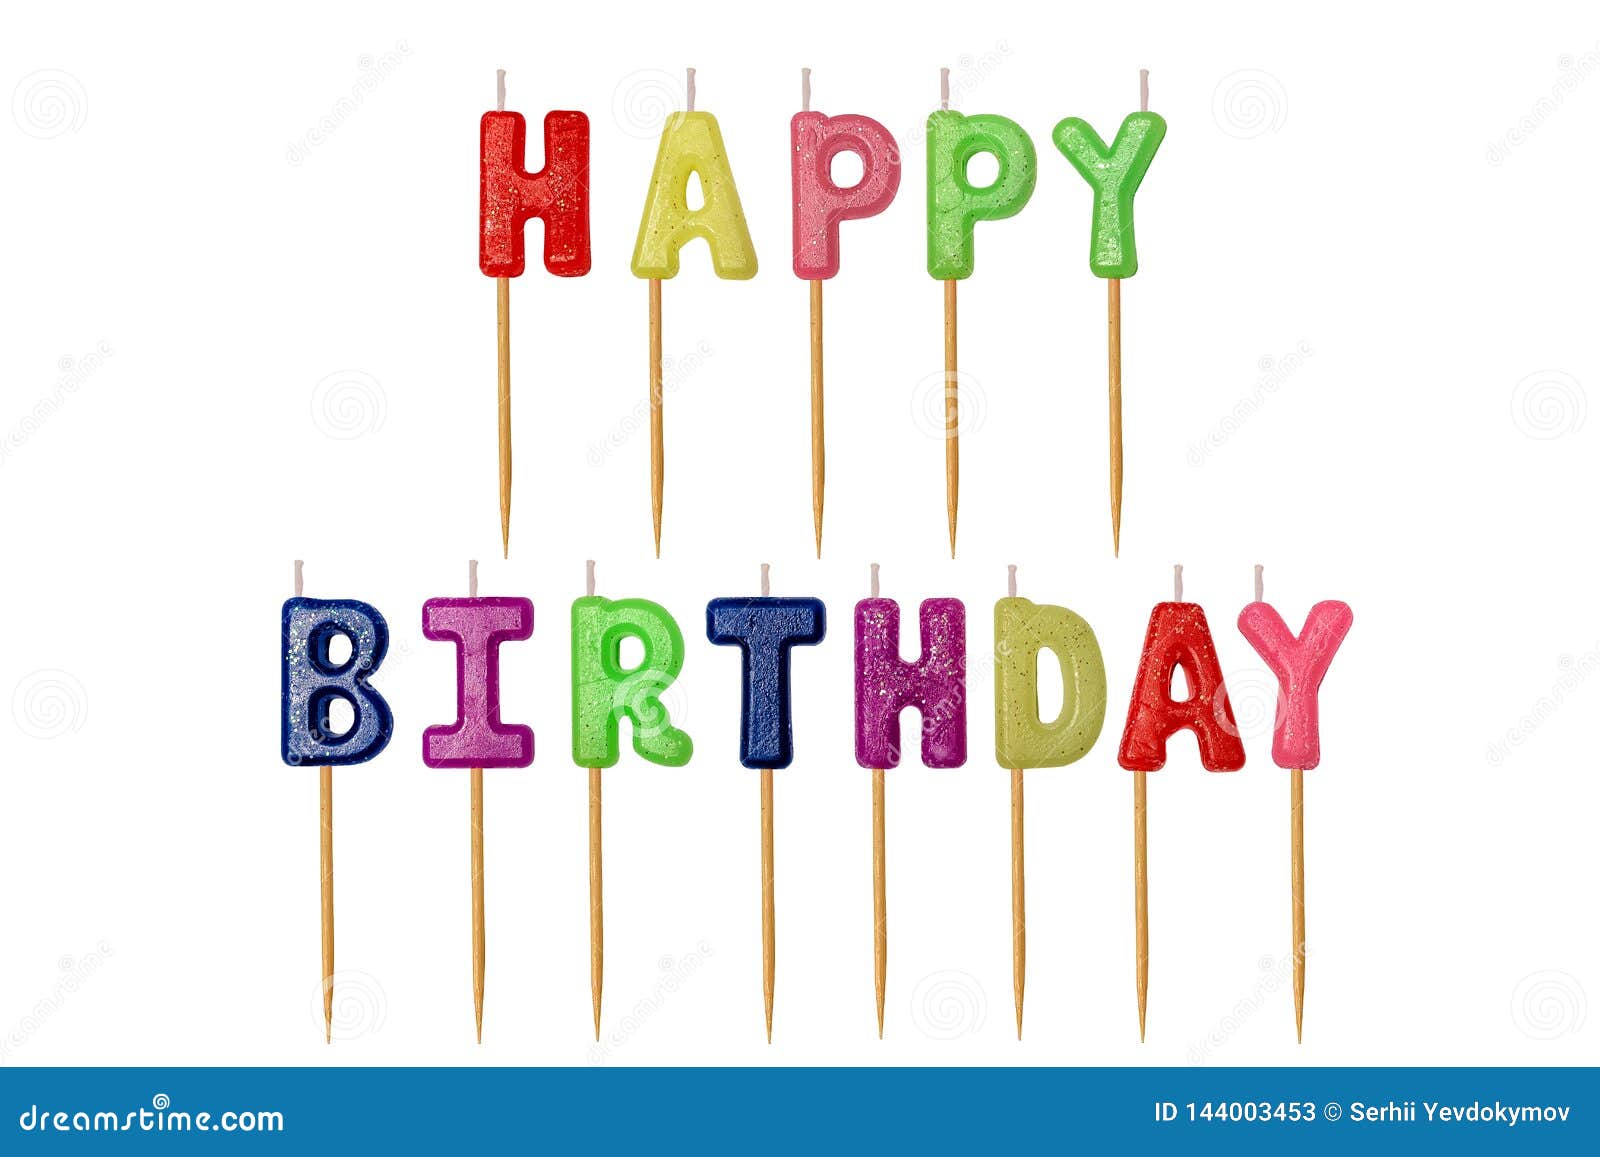 Multicolored Inscription Happy Birthday Candles Letters On Wooden Stick